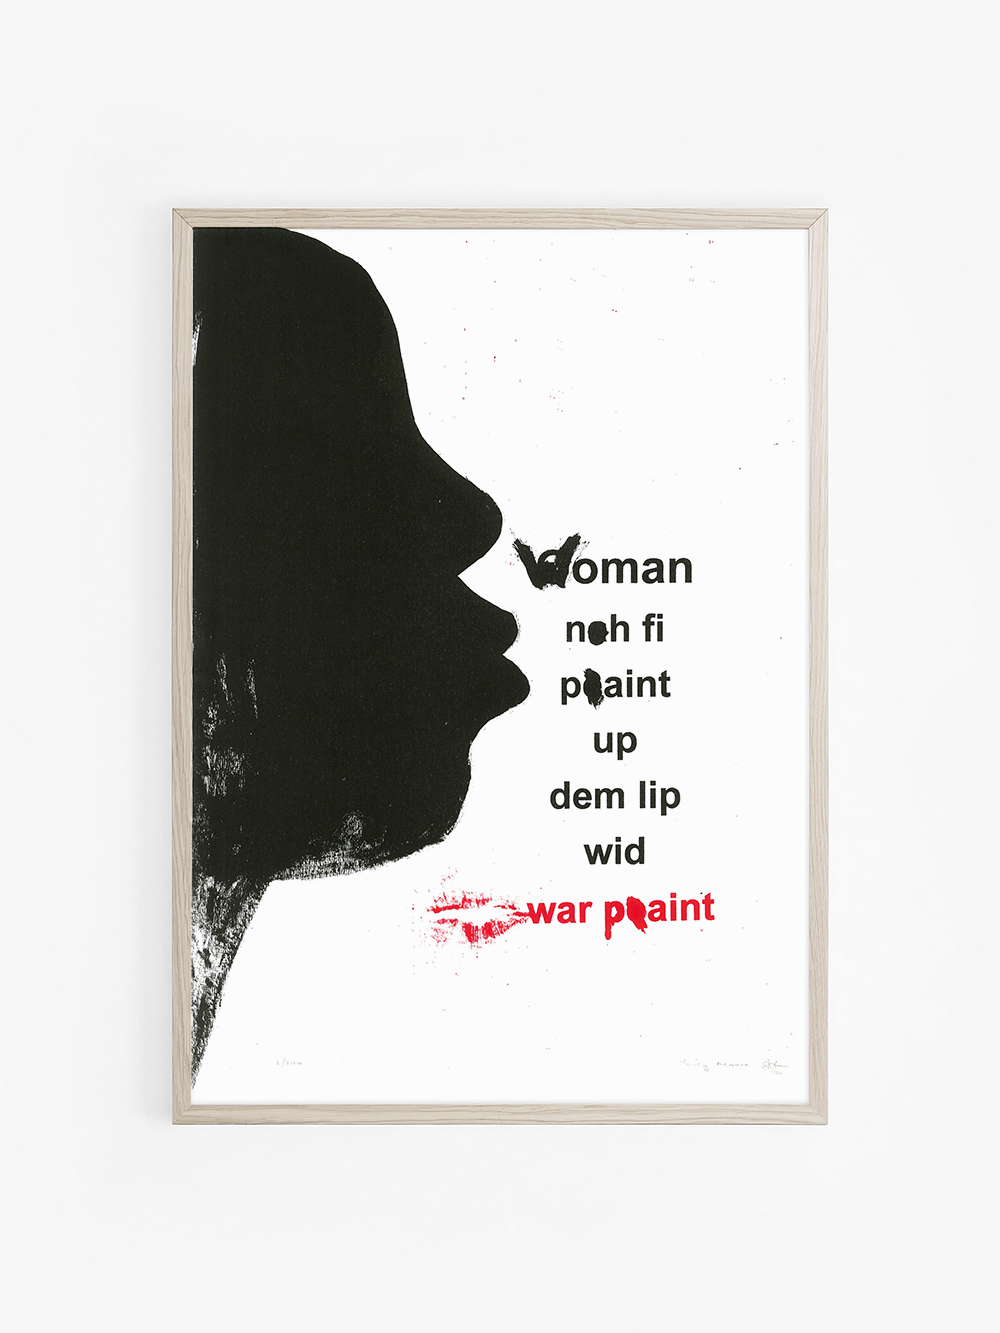  Emily Moore, Women are not supposed to wear war paint (lipstick) on their lips, Ellipsis Prints 